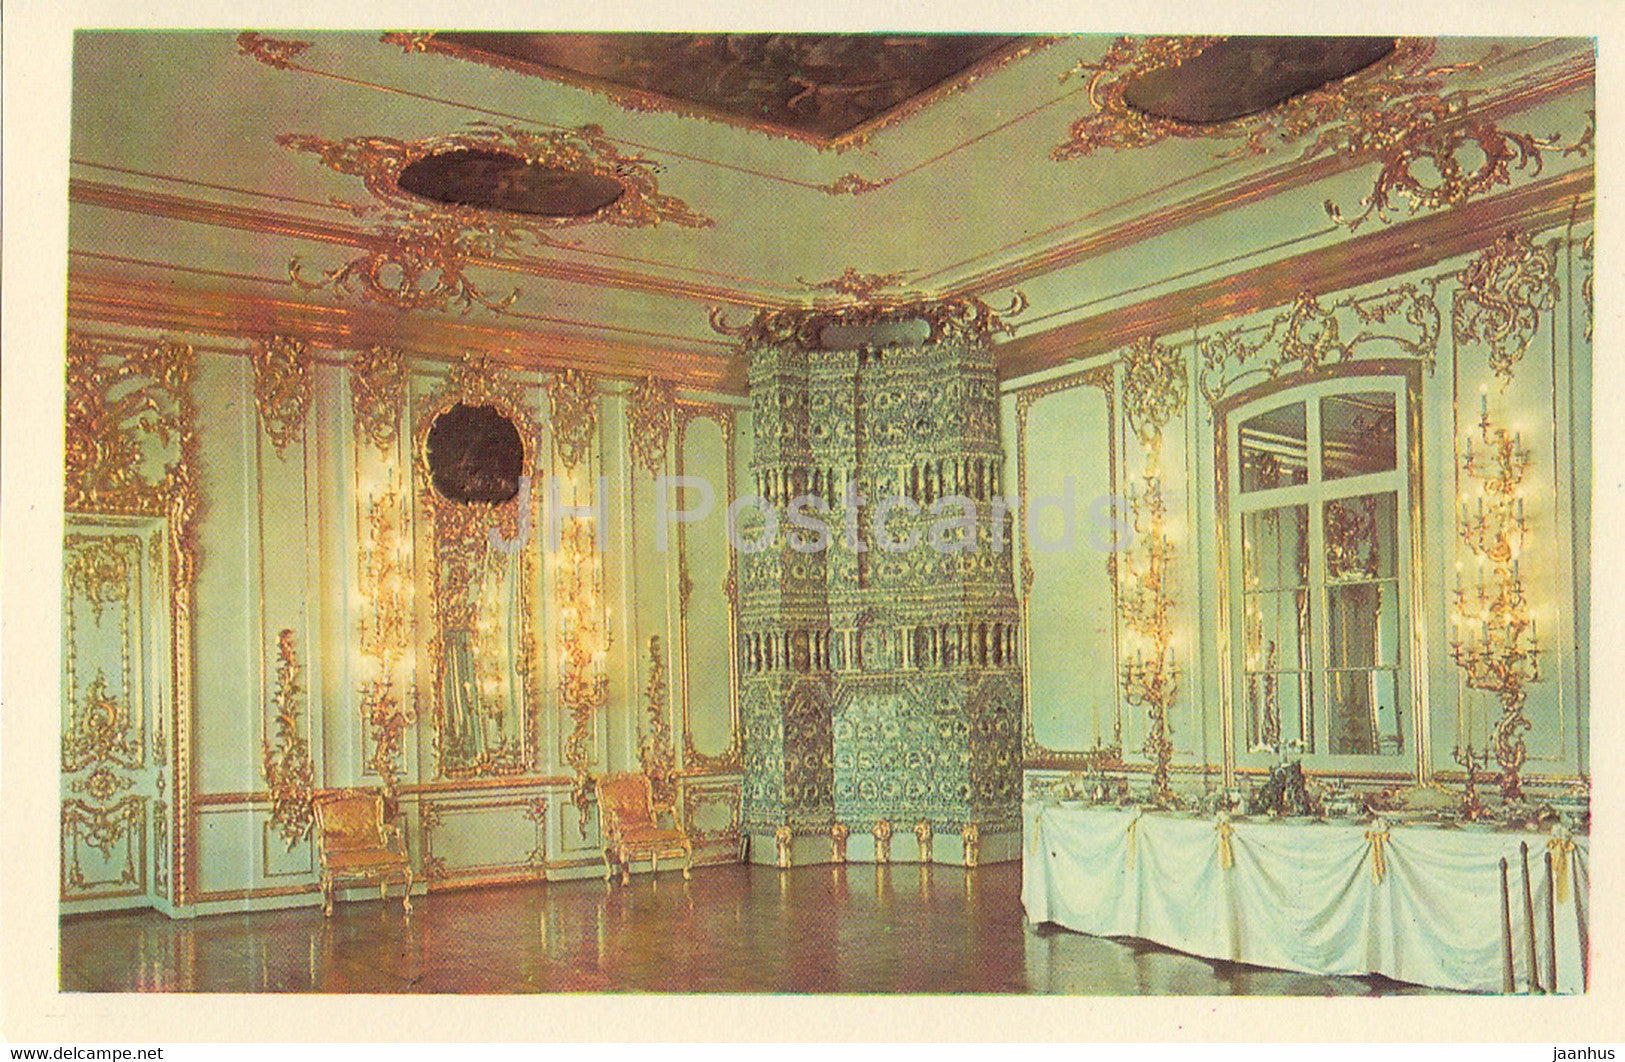 Town of Pushkin - Great (Yekaterinsky) Palace - Tile stove in the Noblemen's Dining Room - 1971 - Russia USSR - unused - JH Postcards